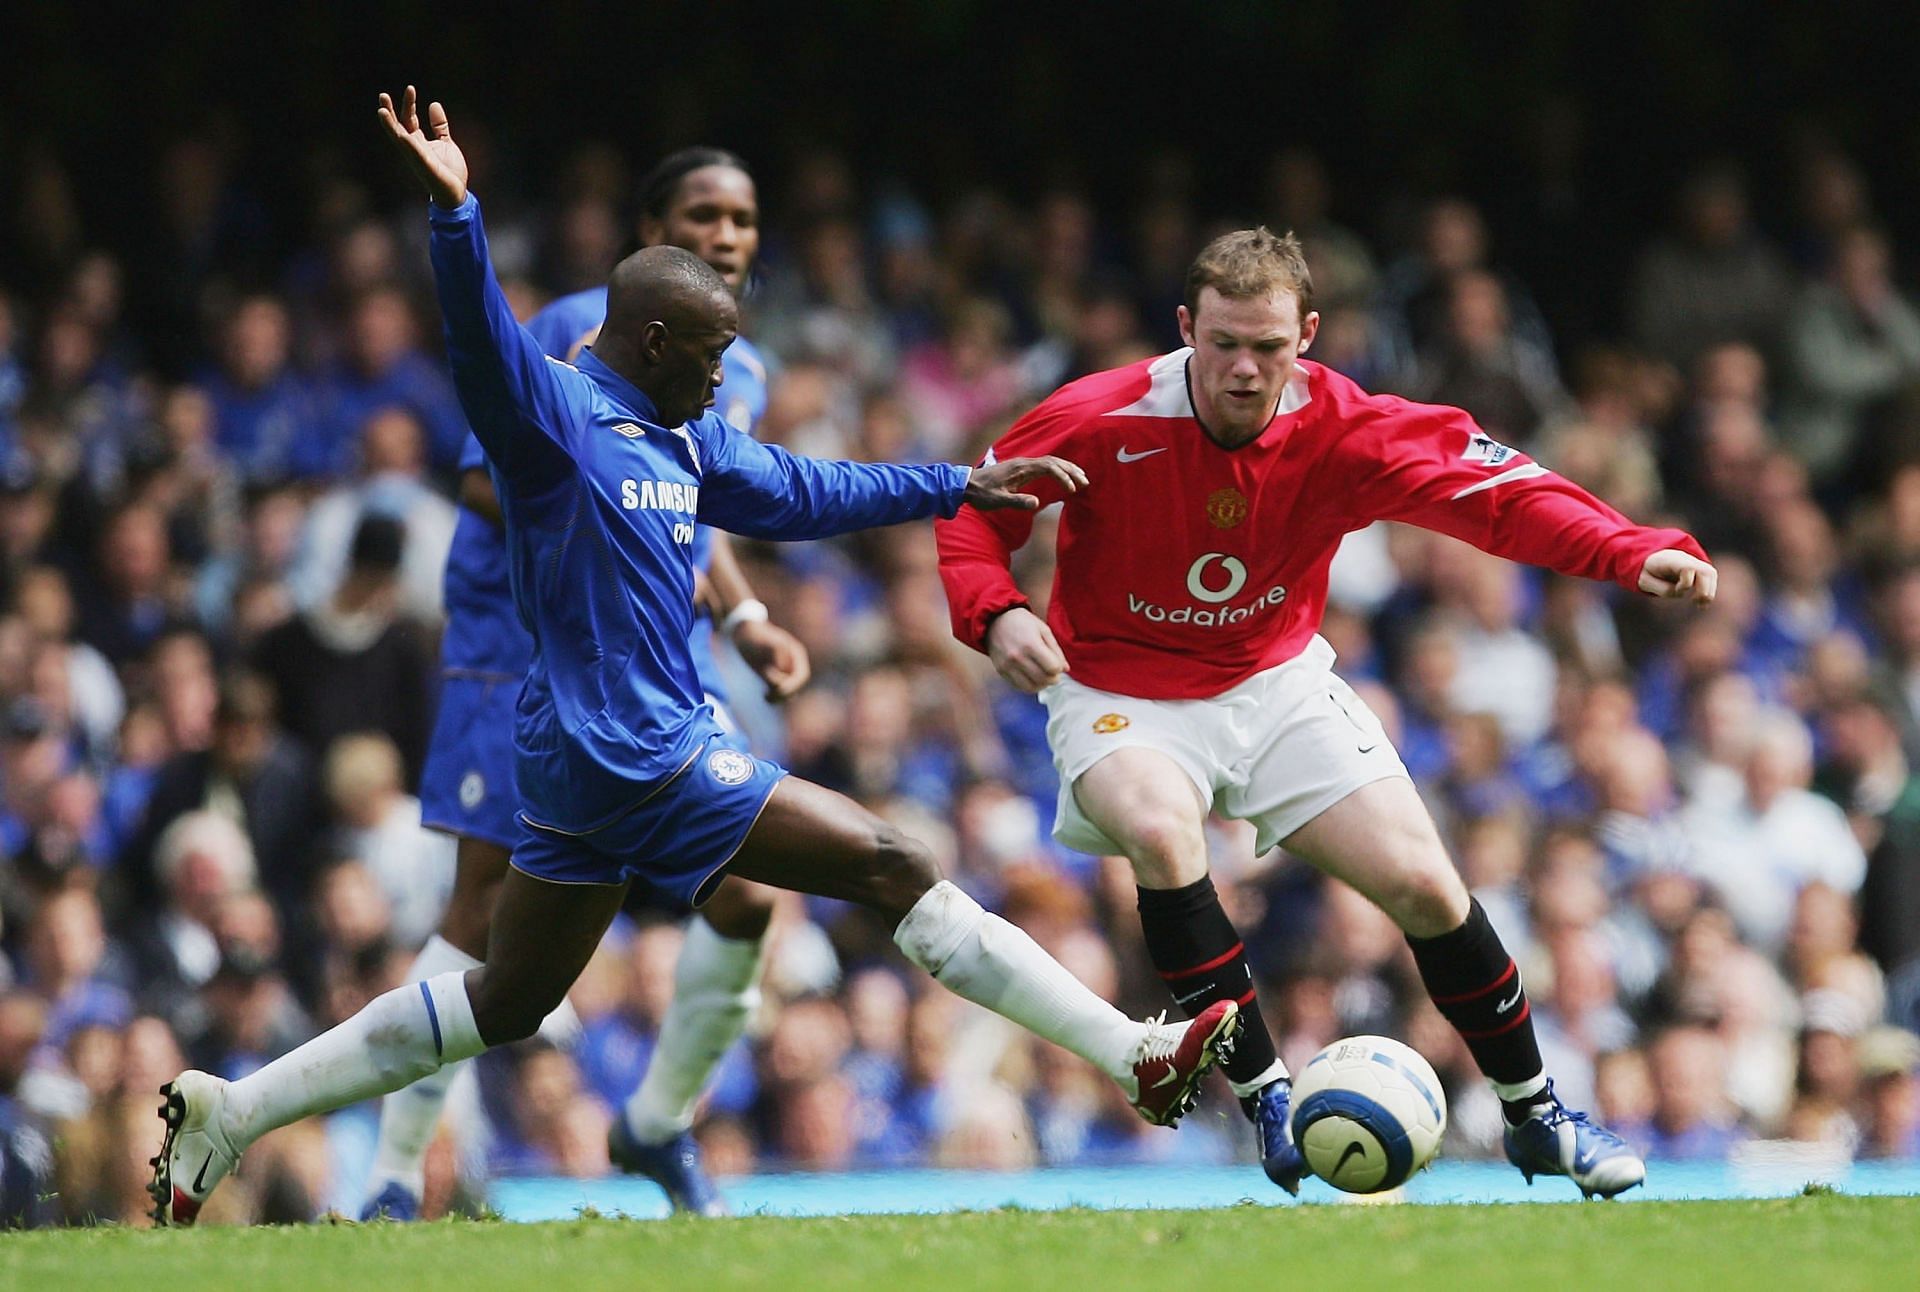 Claude Makelele in action for Chelsea and Manchester United